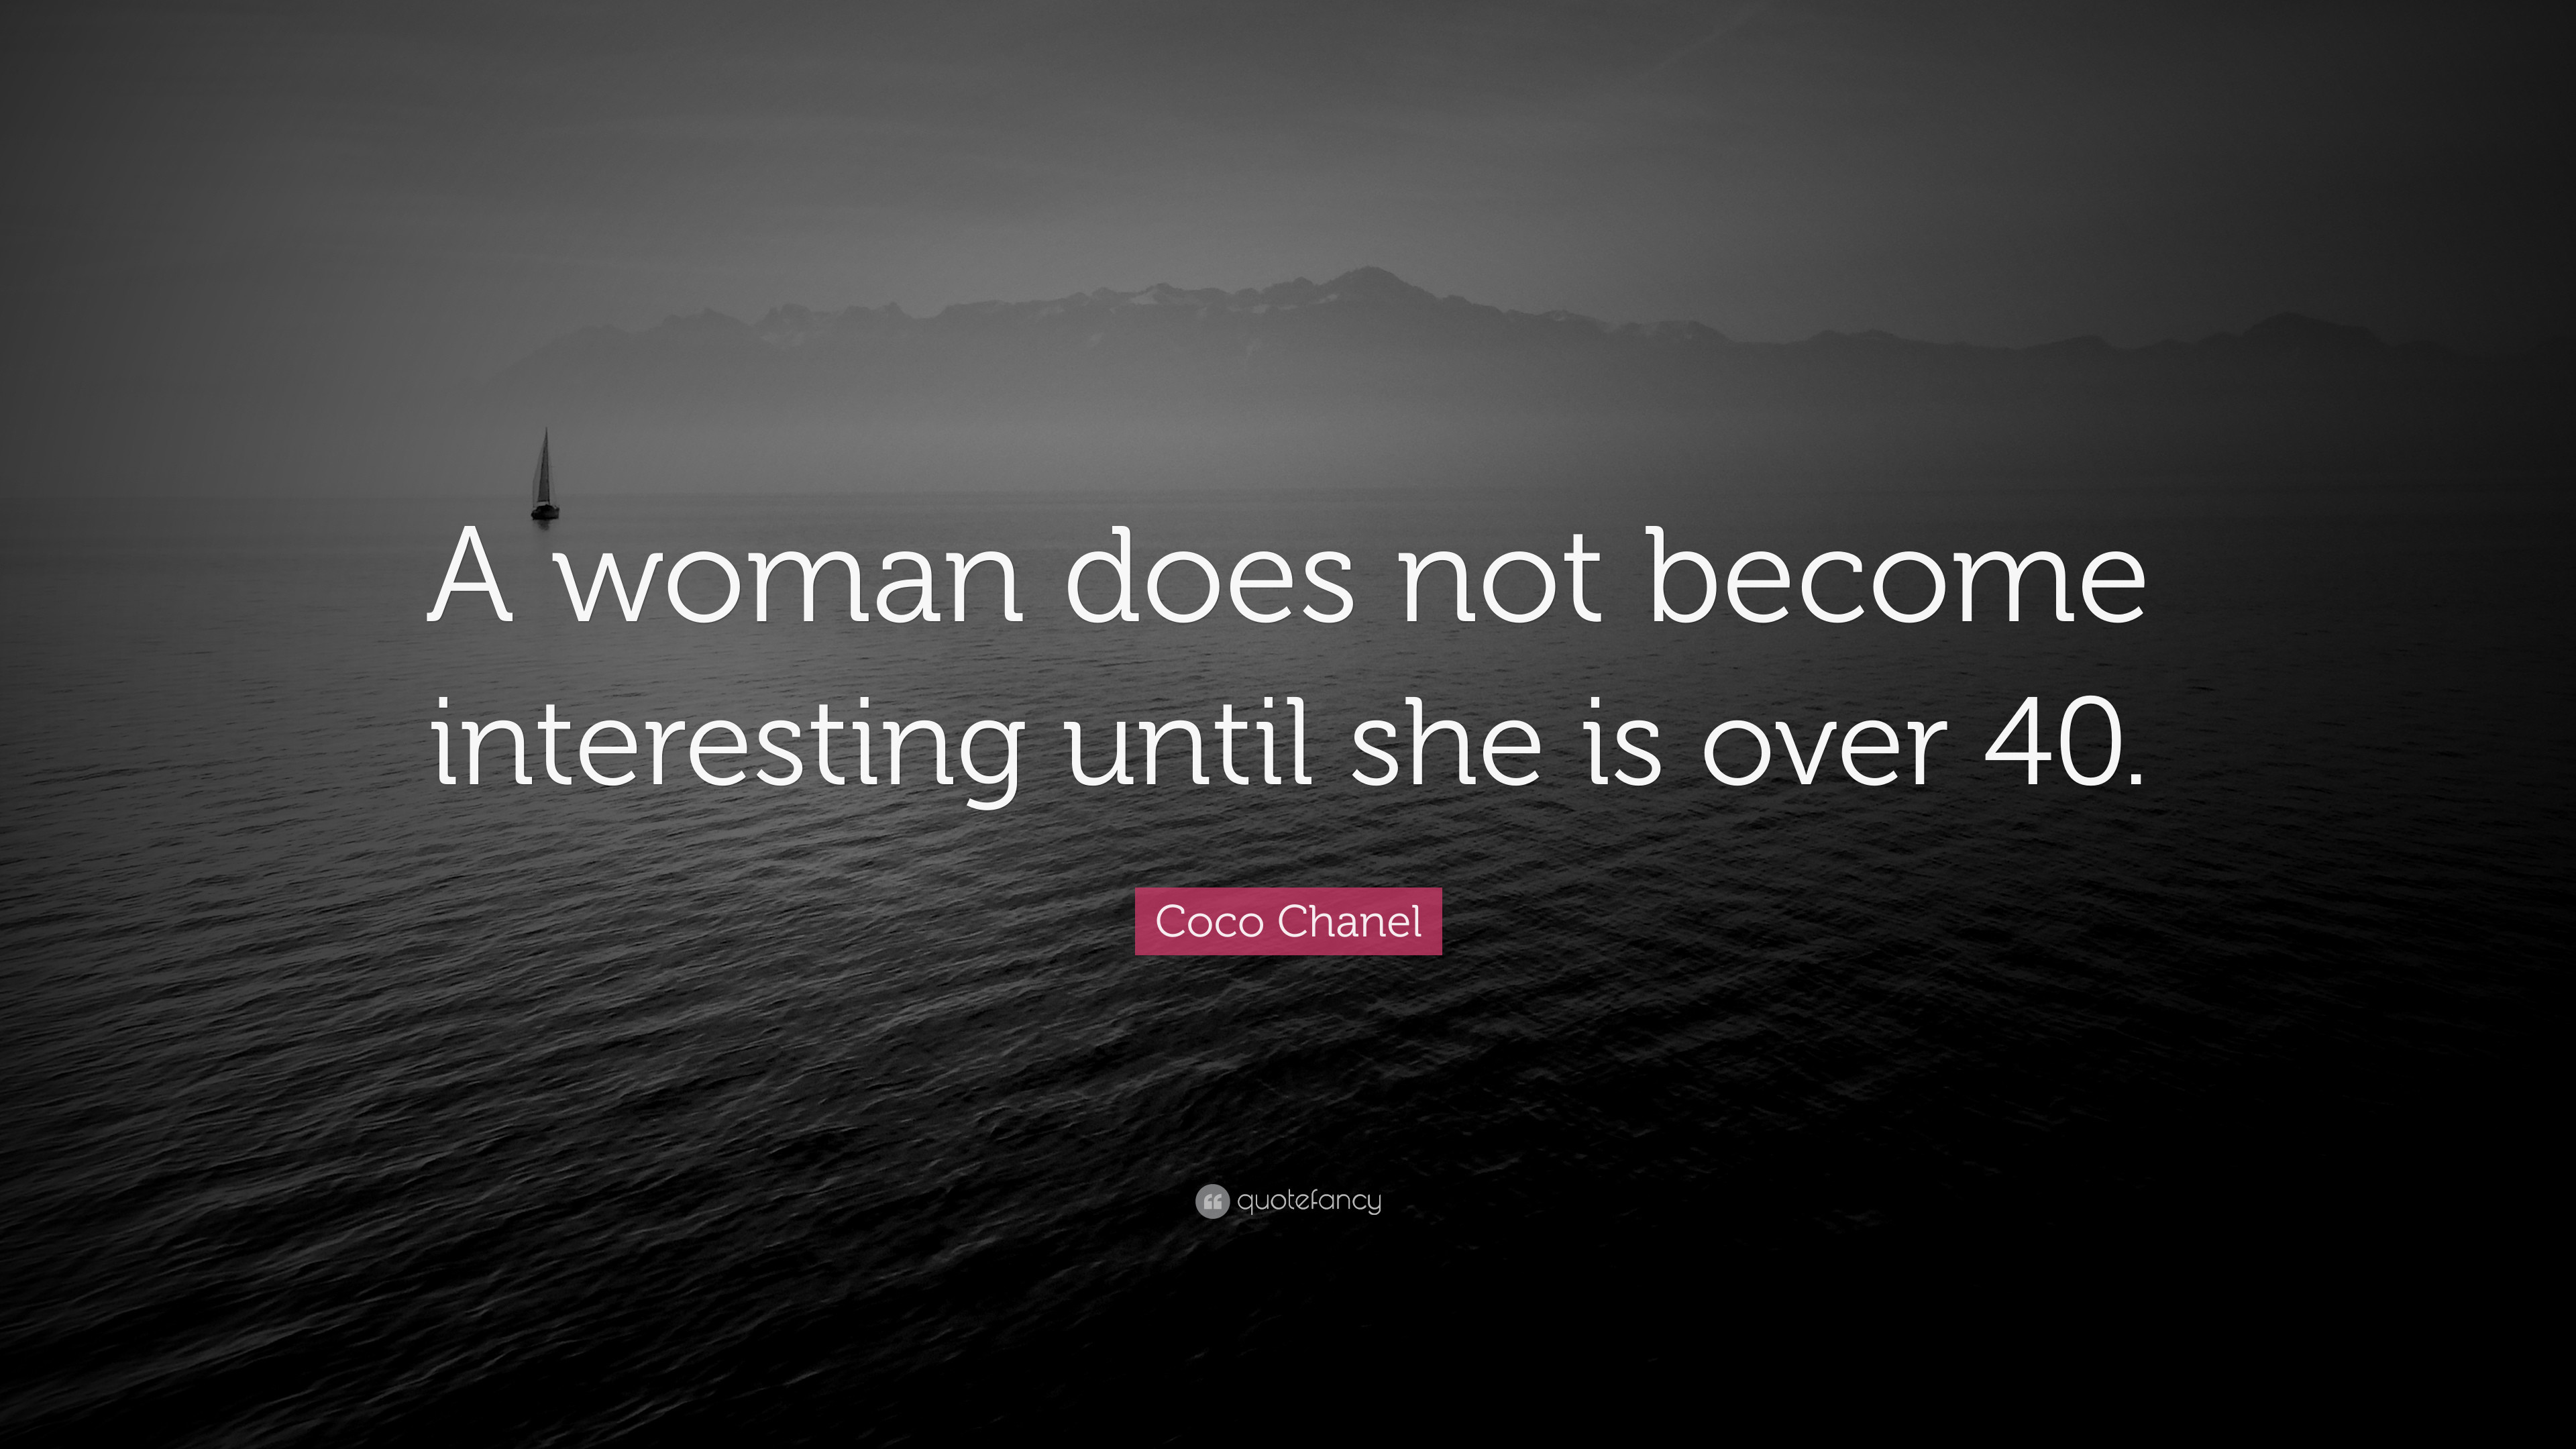 3840x2160 Coco Chanel Quote: “A woman does not become interesting until she is over 40